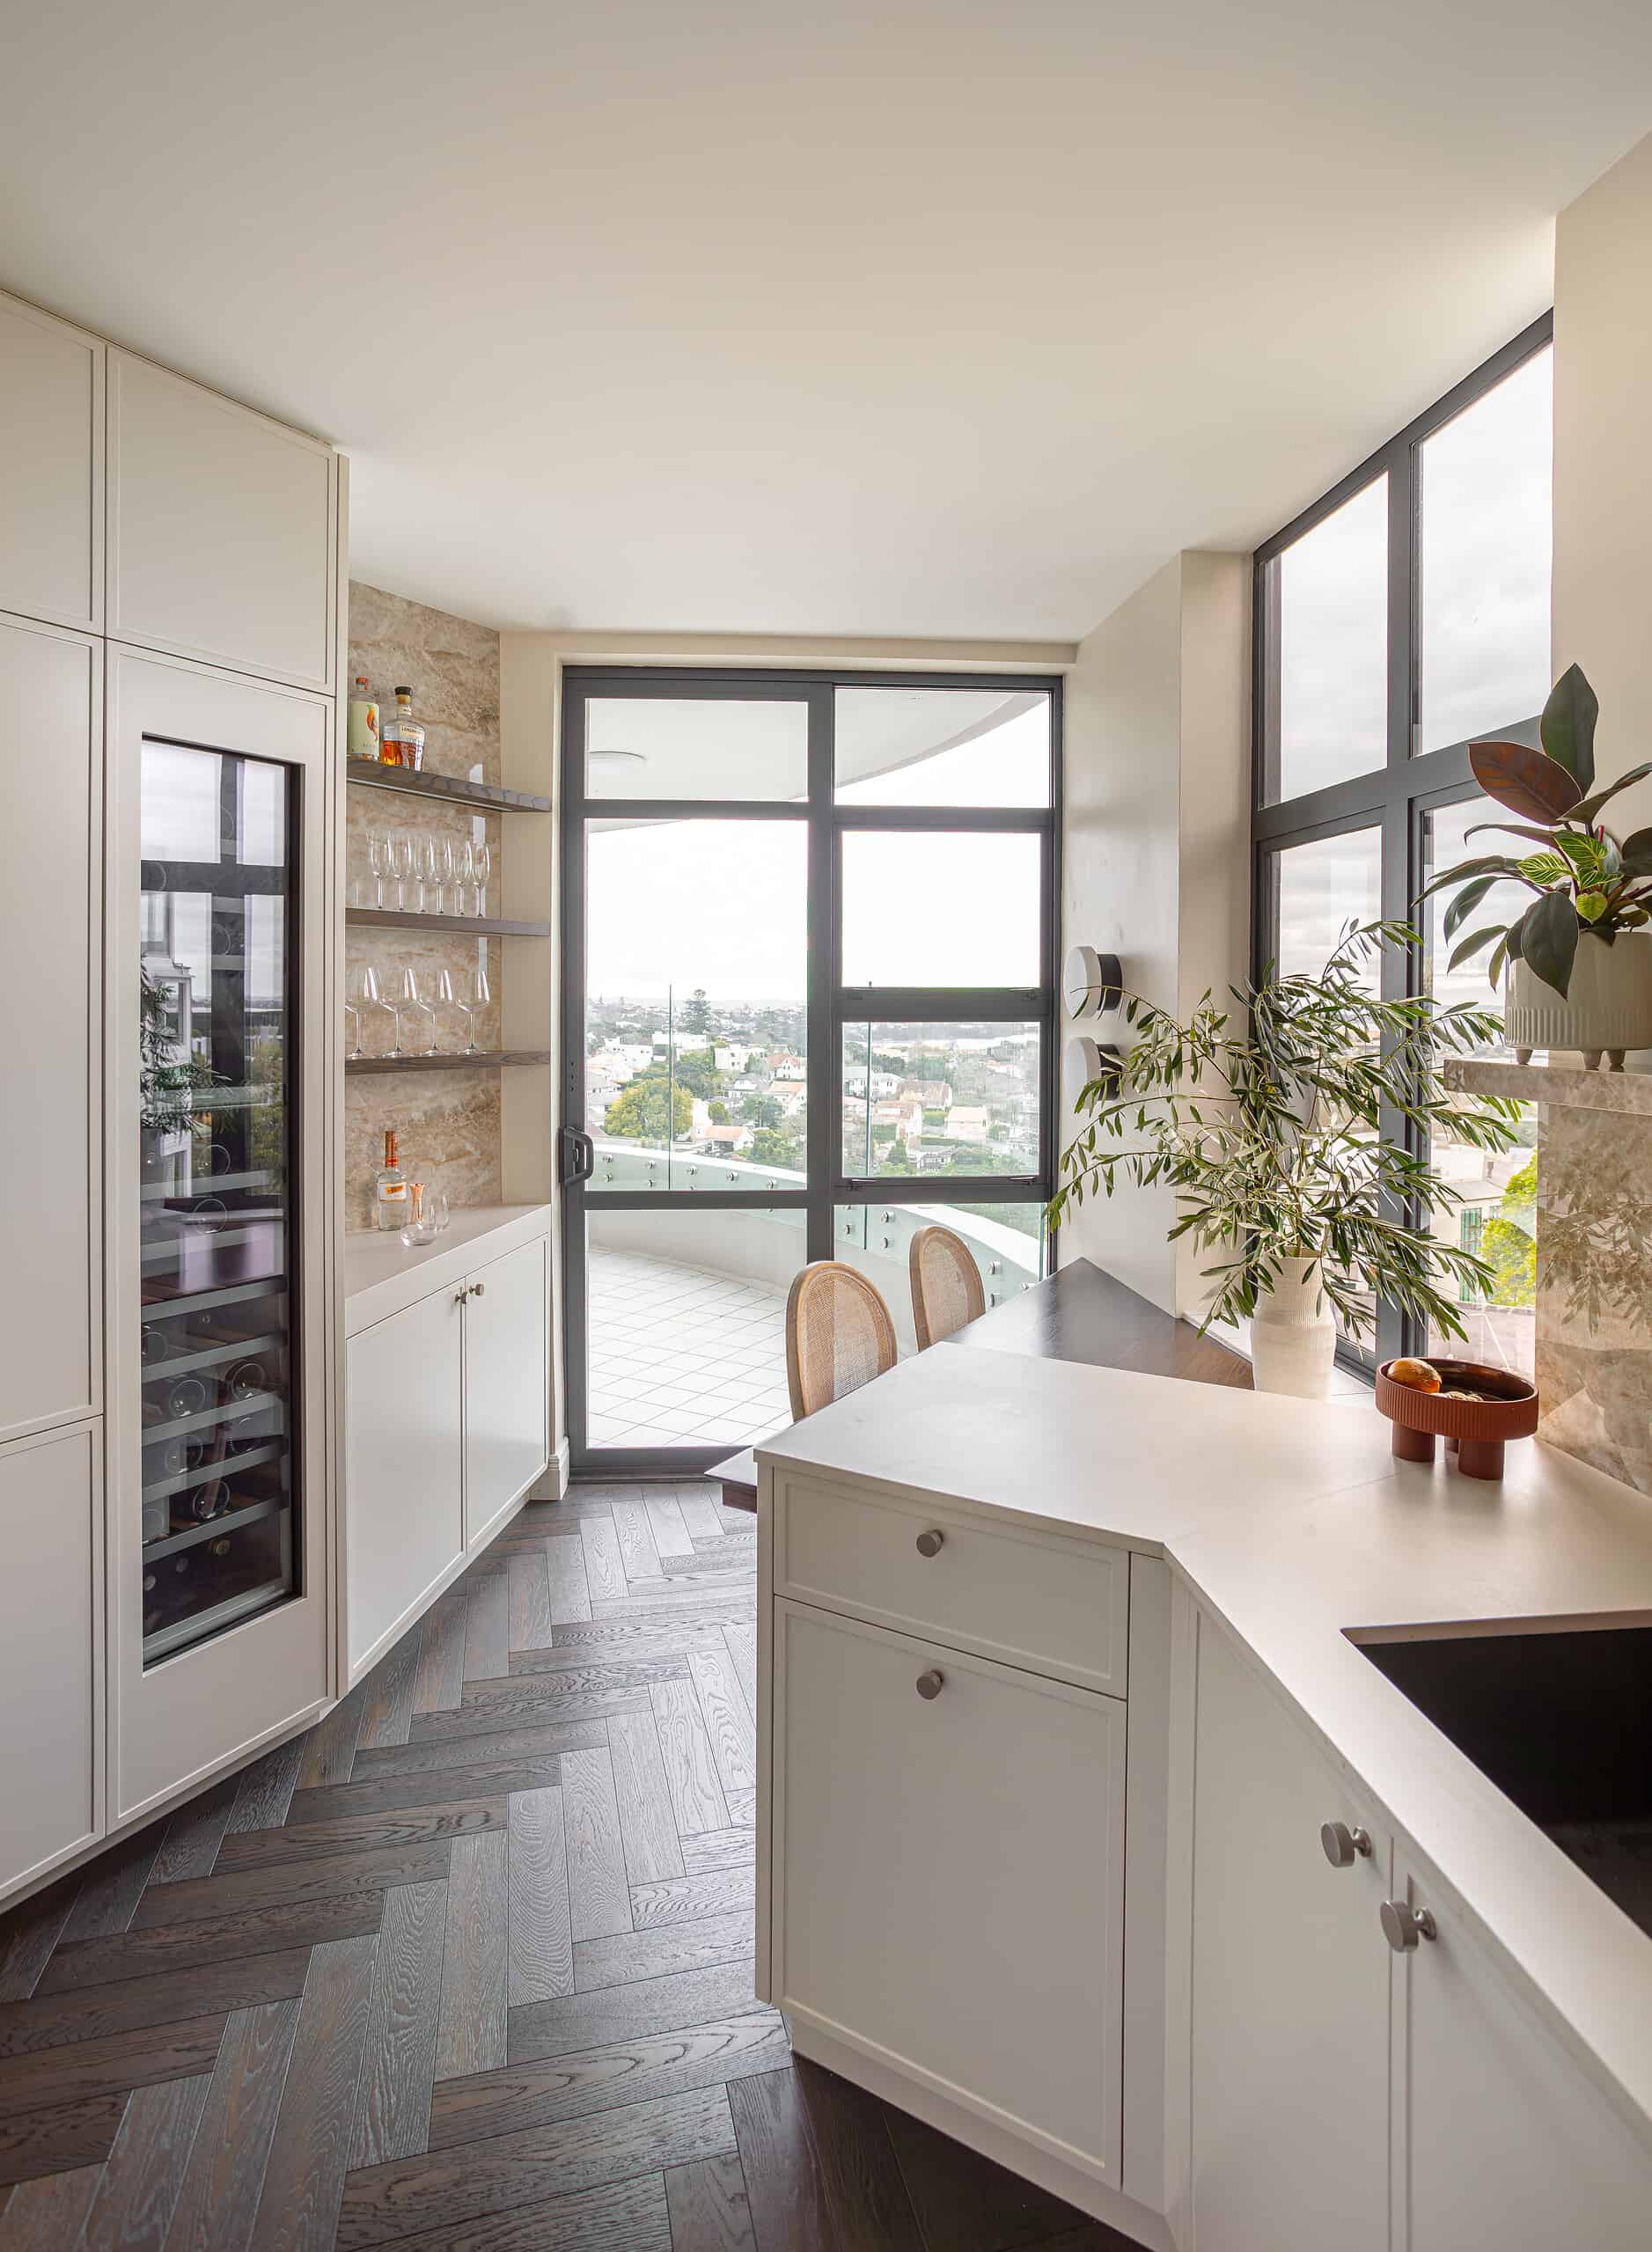 Cream kitchen with city views and a wine fridge